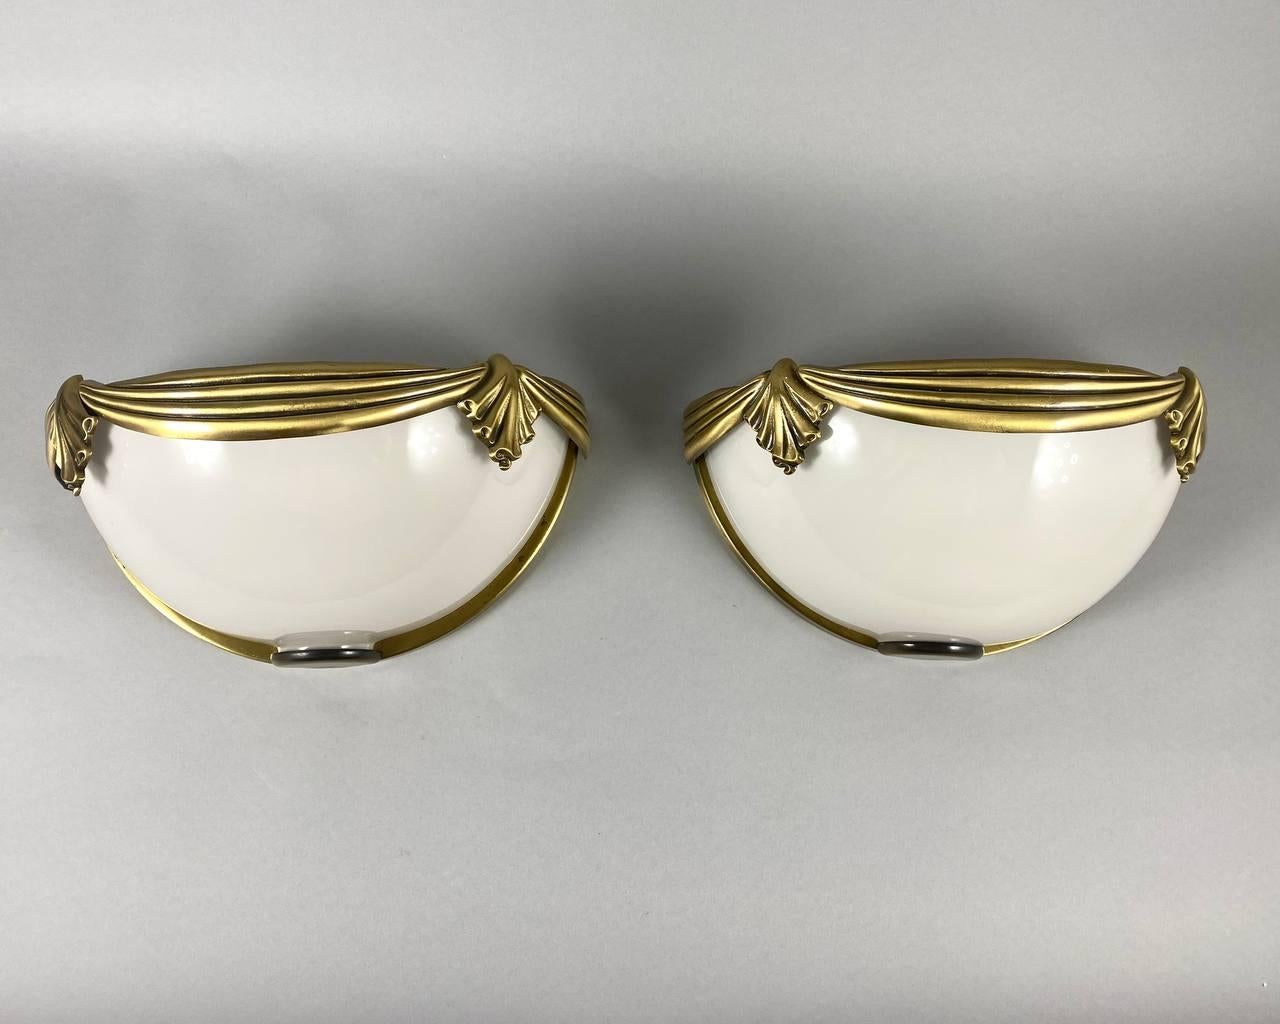 Vintage wall sconces made of authentic opaline glass and brass.

From Spanish Manufacturer Cuenca Iluminacion S.A.

circa 1980s. Spain.

Rare and sophisticated pair of Spanish Wall Sconces. 

Each lamp has a handsome gilt brass frame where